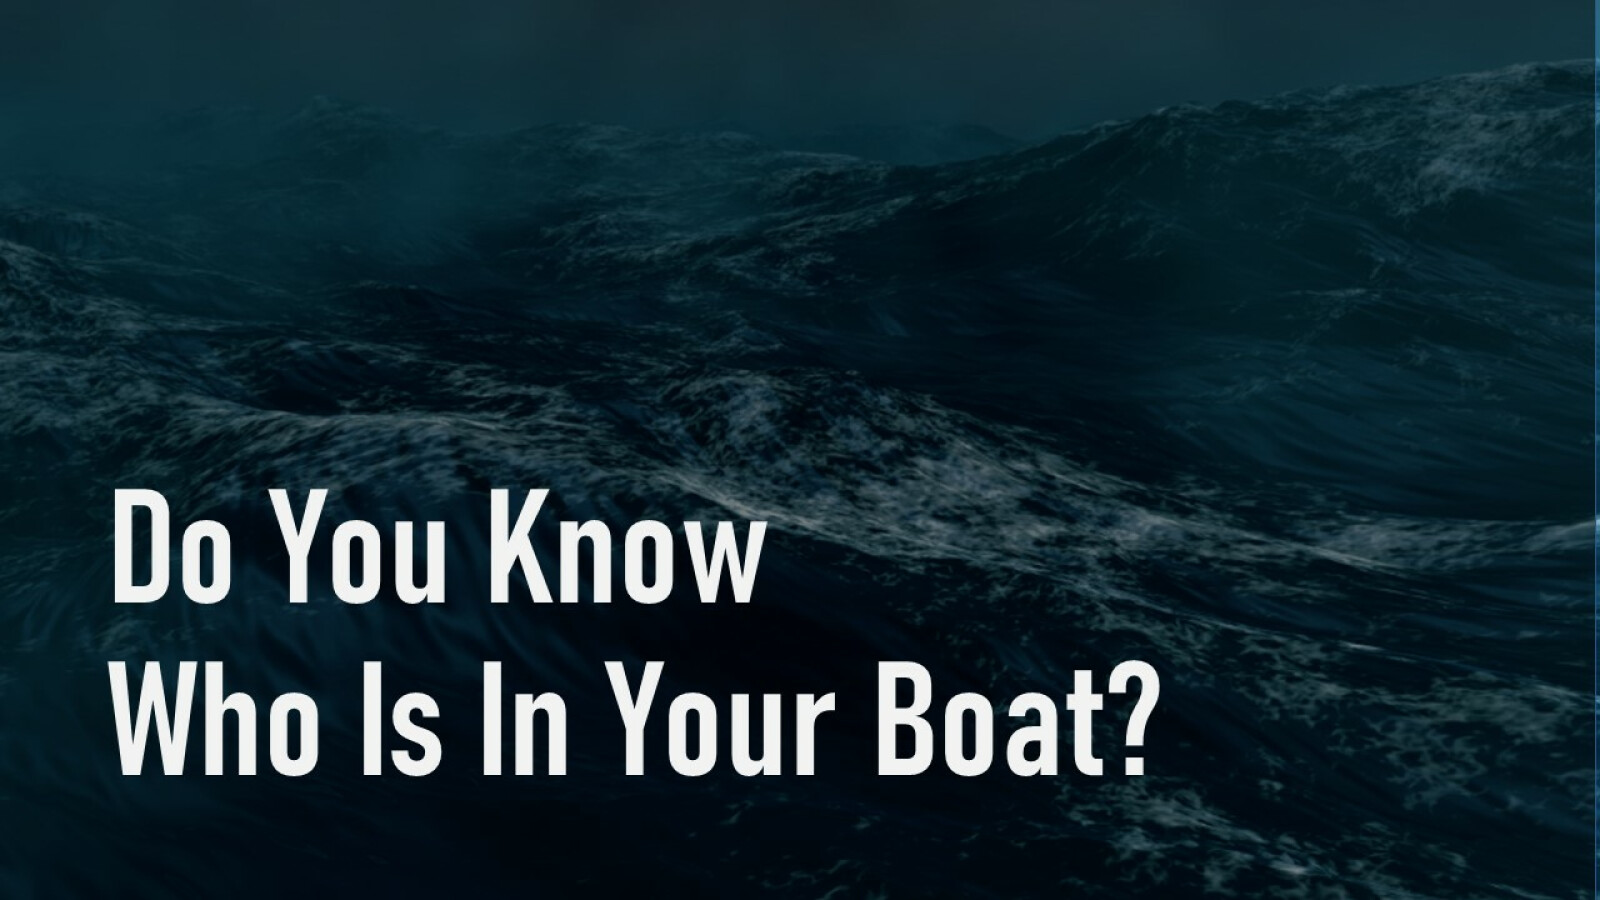 Do You Know Who Is In Your Boat?